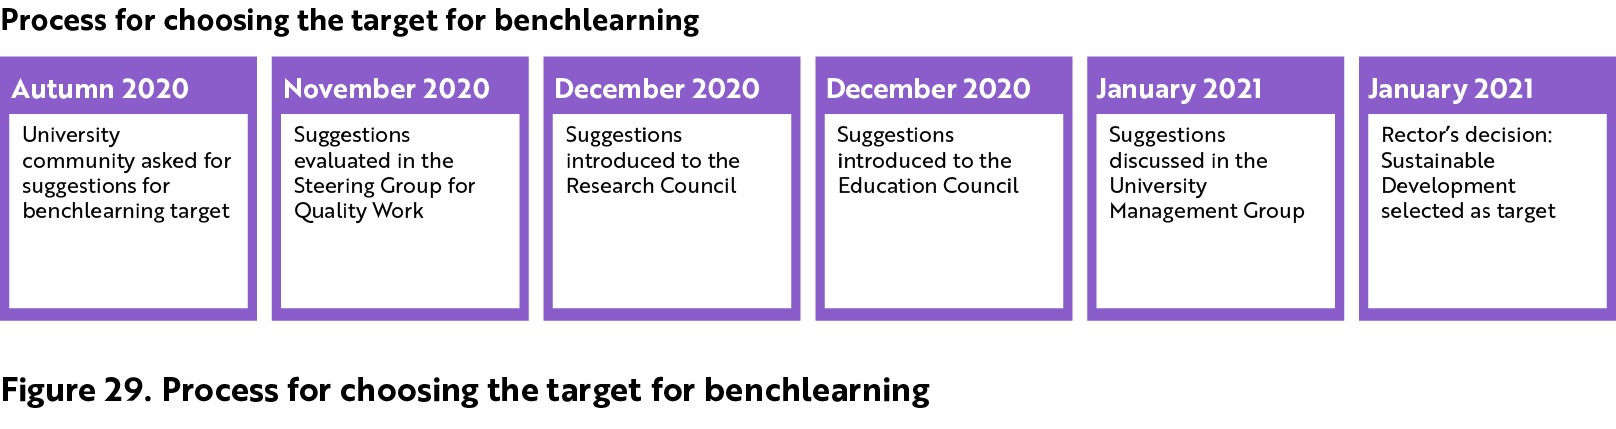 In Autumn 2020 the University community asked for suggestions for benchlearning target. In November 2020 the suggestions were evaluated in the Steering Group for Quality Work. In December 2020 the suggestions were introduced to the Research Council and to the Education Council. In January 2021 the suggestions were discussed in the University Management Group. In January 2021 the Rector’s decision. Sustainable Development selected as the target.